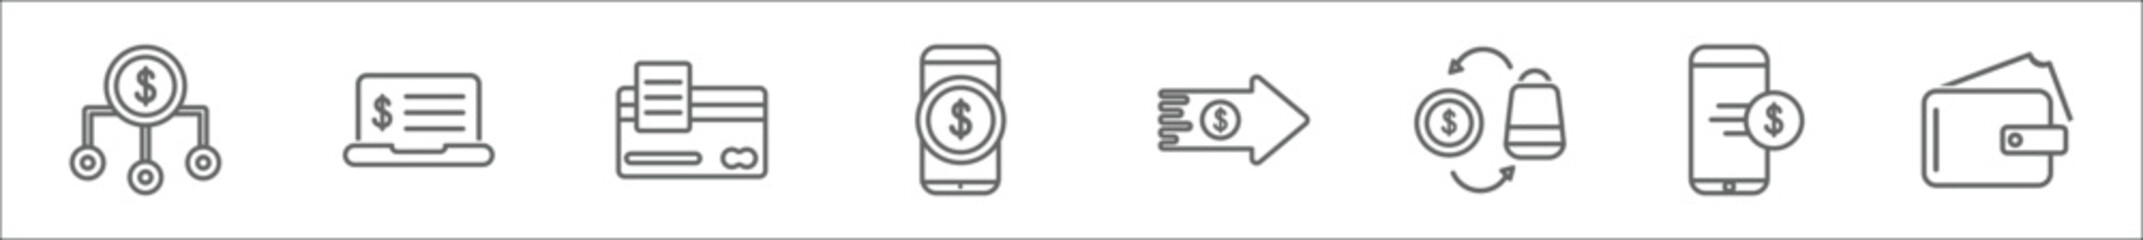 outline set of payment line icons. linear vector icons such as sharing, online banking, debit payment, mobile money, transfer money, trade, mobile transfer, payment